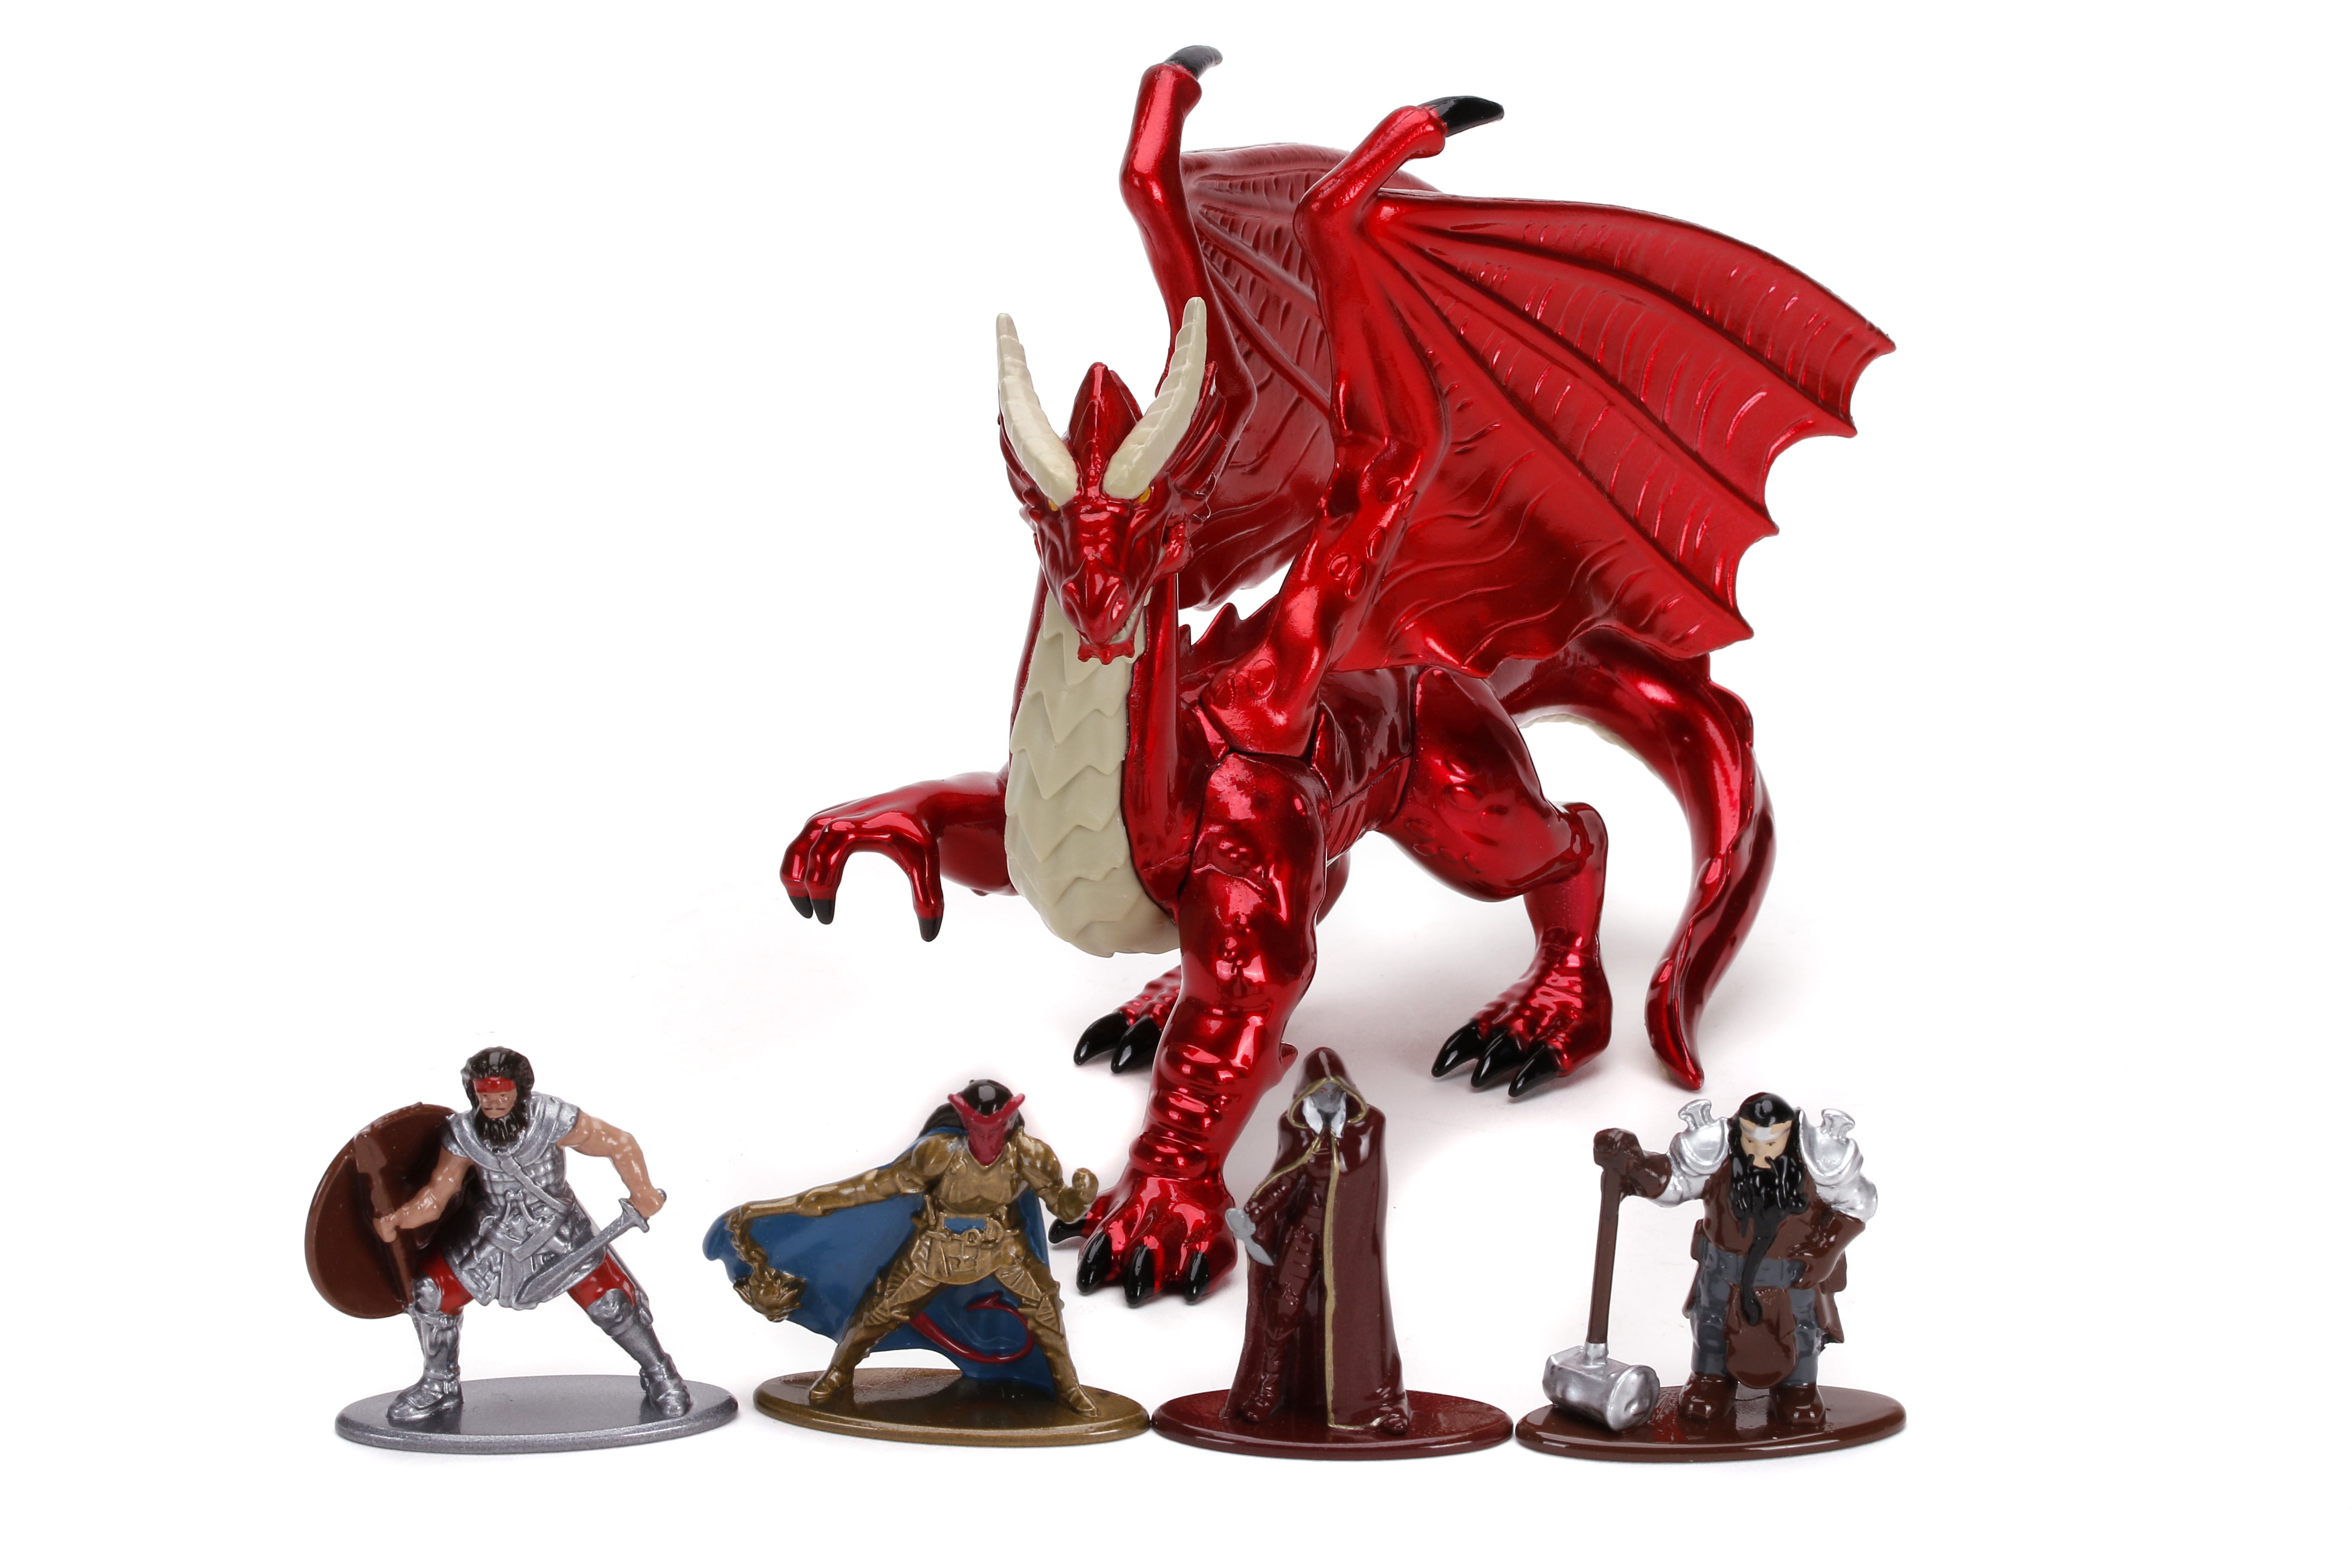 Red Toys for Kids and Adults Jada Toys Dungeons & Dragons 1.65 Die-cast Metal Collectible Figures 5-Pack Wave 1 